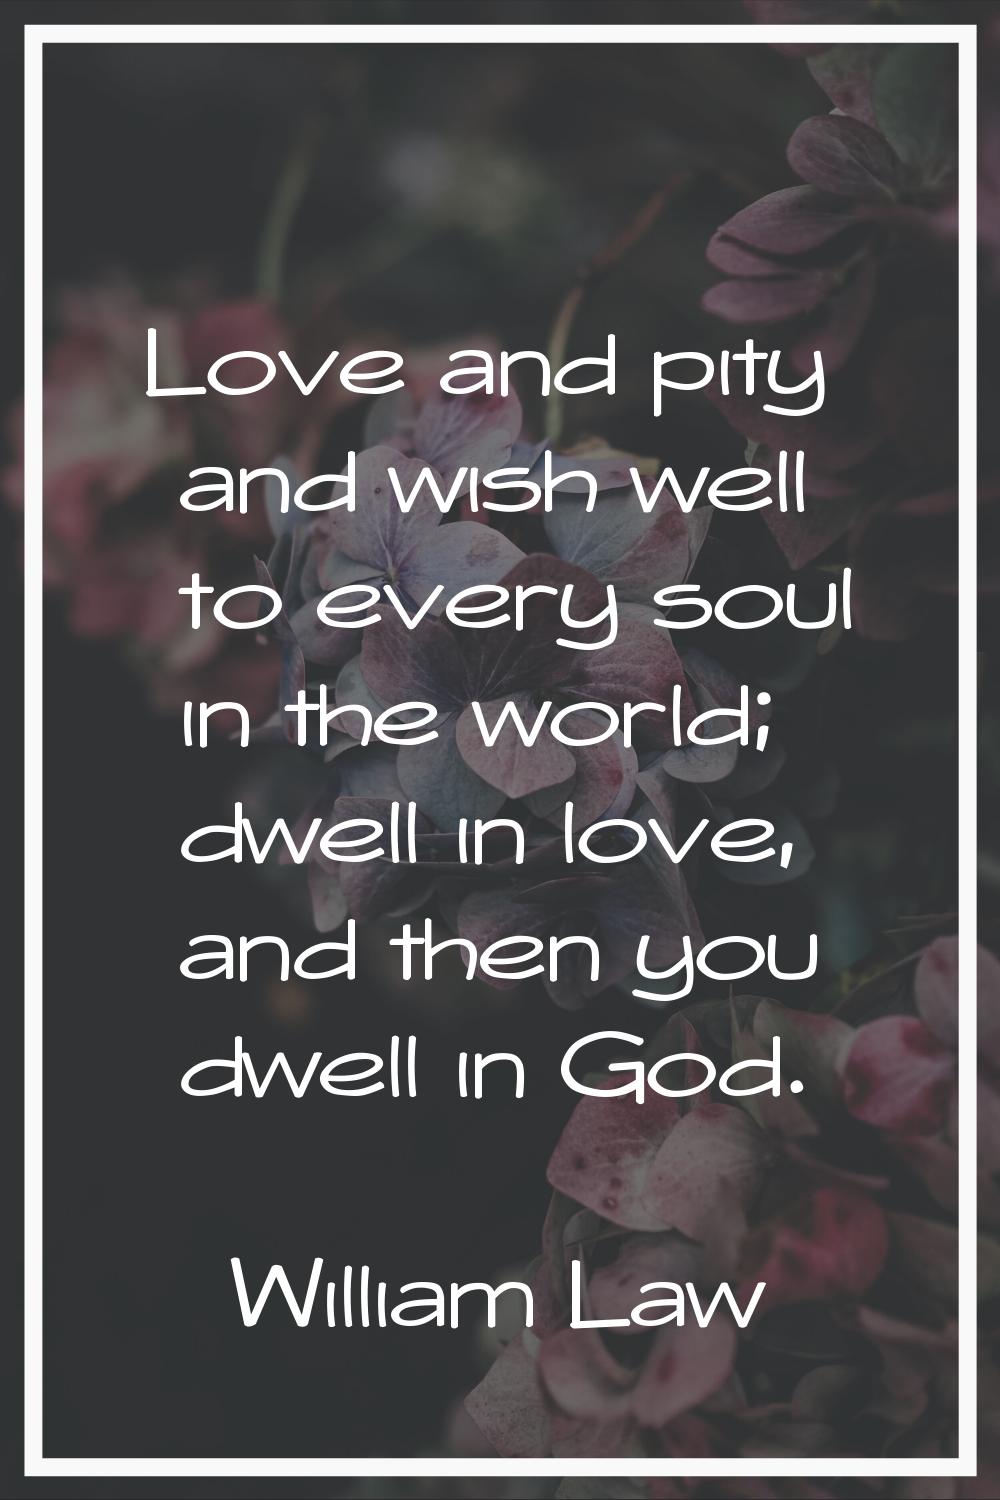 Love and pity and wish well to every soul in the world; dwell in love, and then you dwell in God.